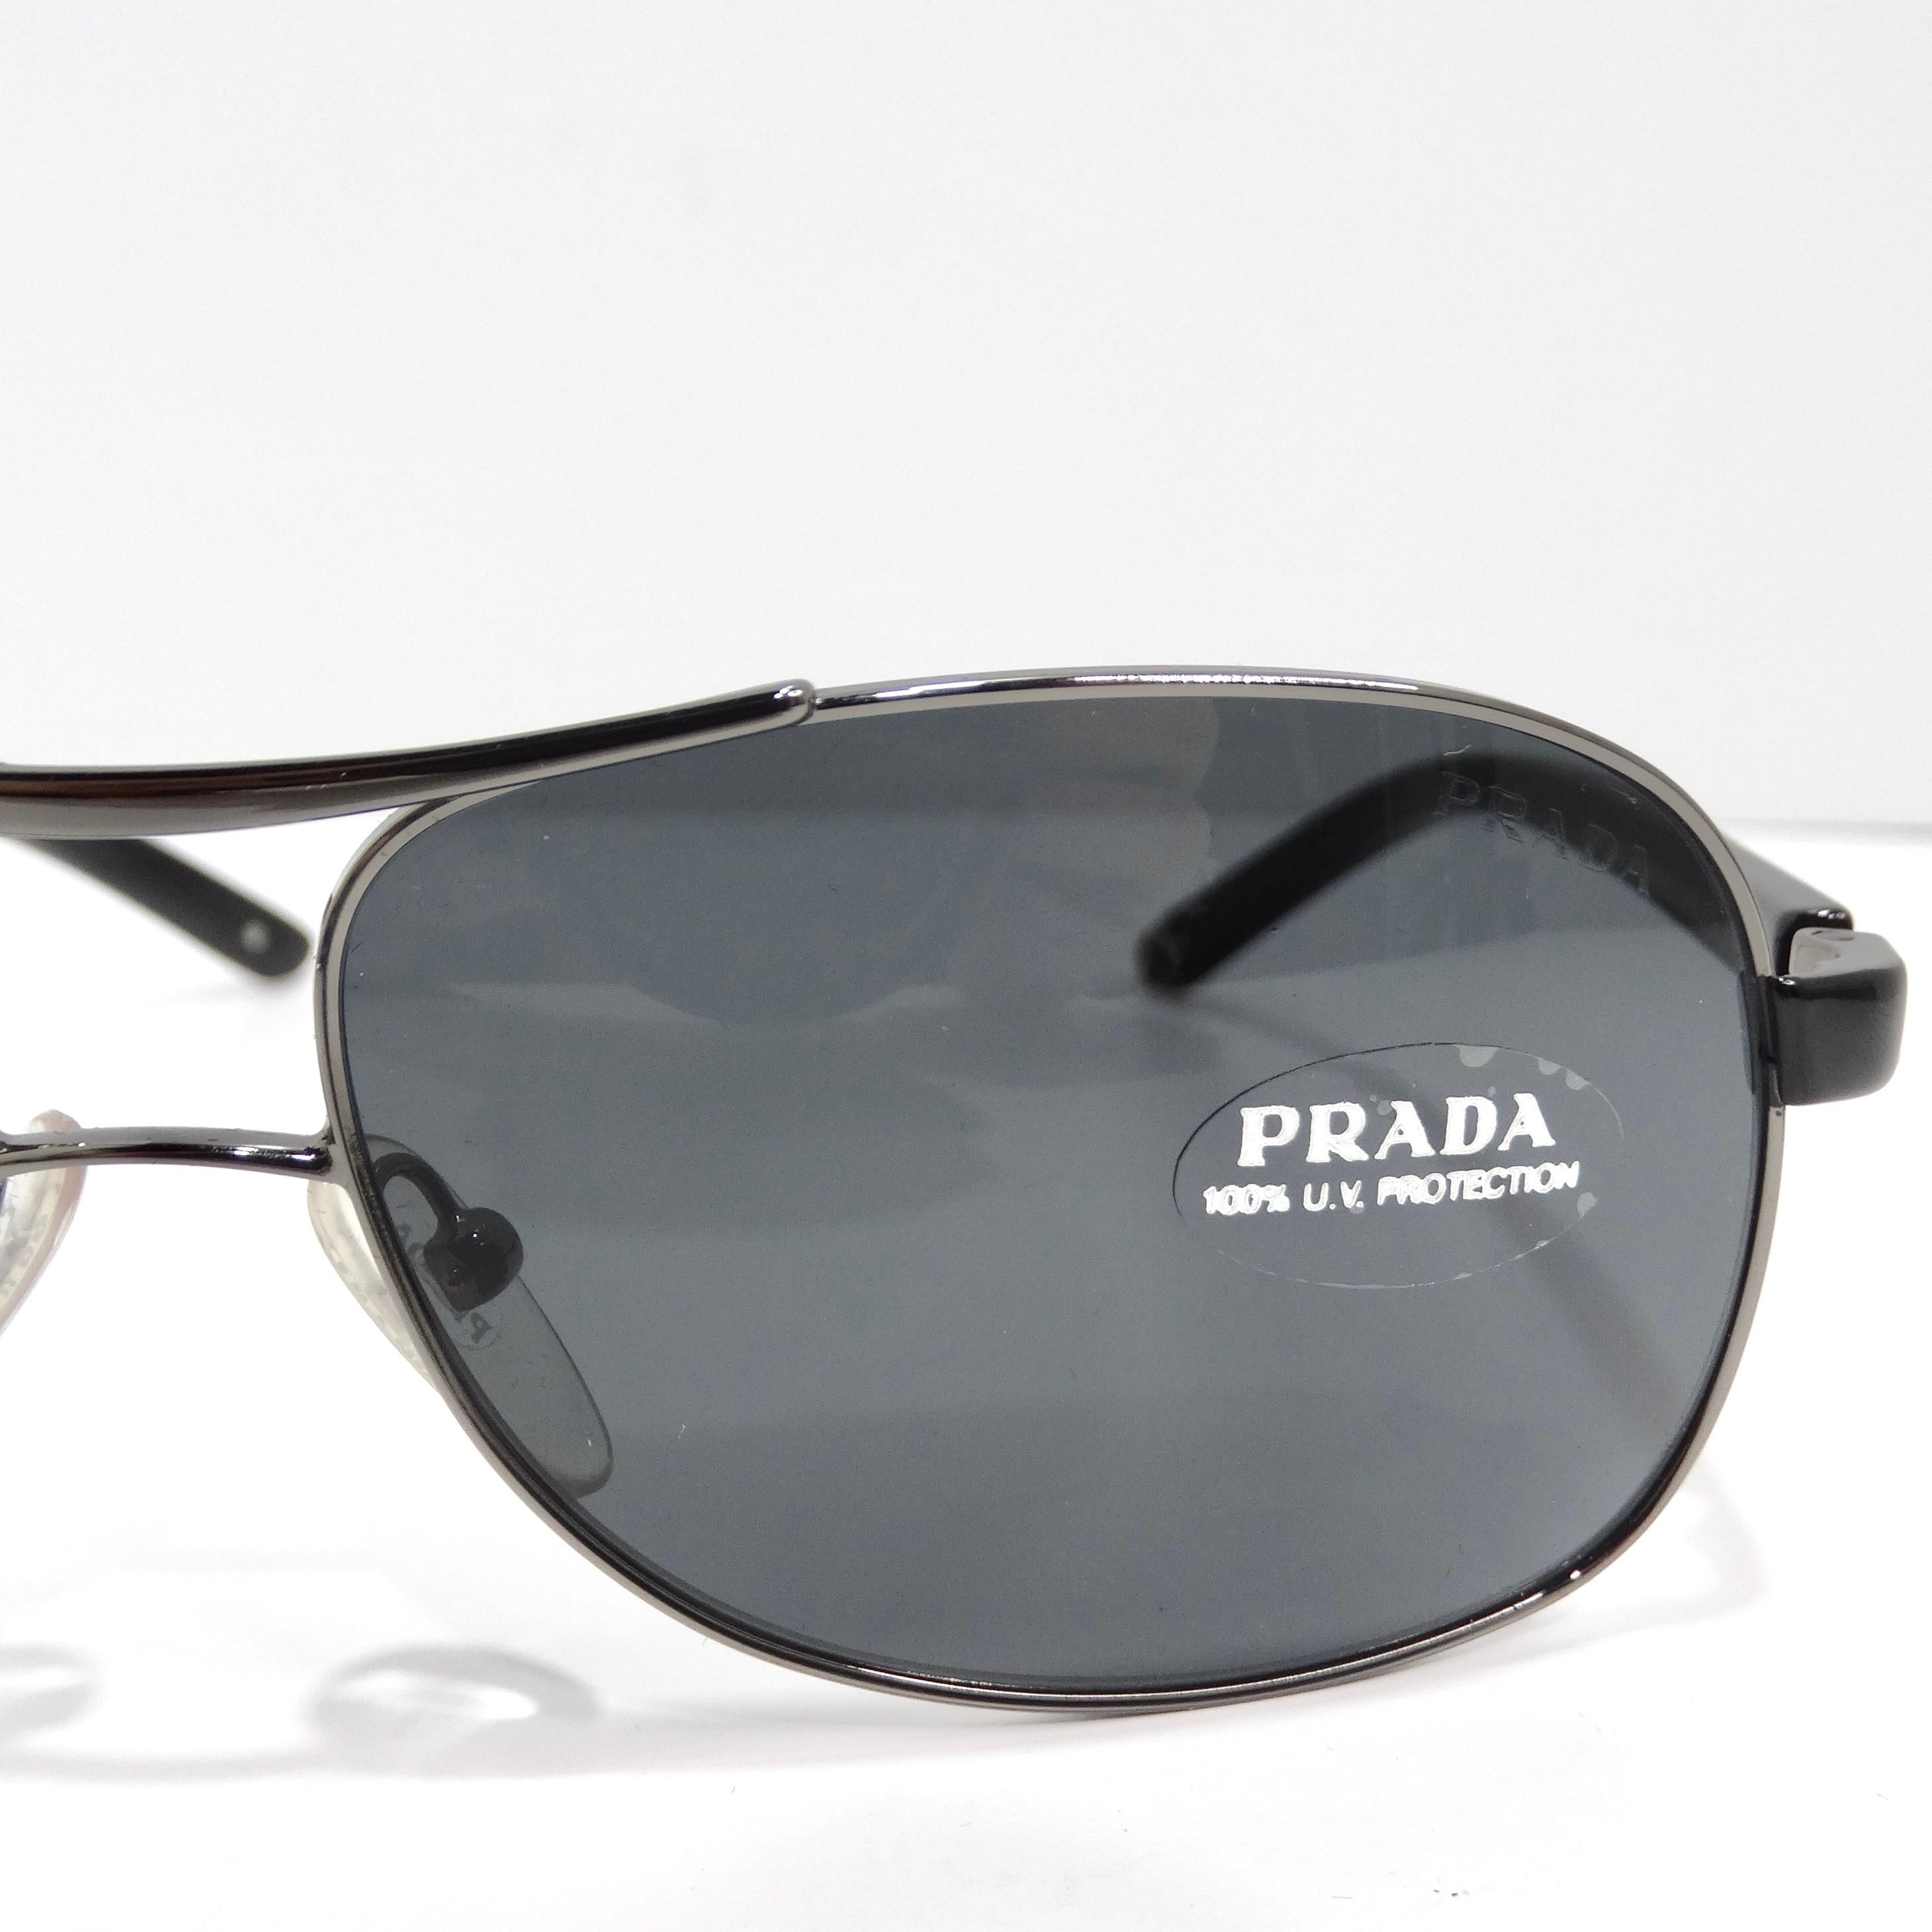 Step into timeless elegance with the Prada 1990s Silver Tone Aviator Sunglasses, a classic aviator style that effortlessly combines sophistication with enduring style. These sunglasses feature thin silver-tone rims, complemented by black arms